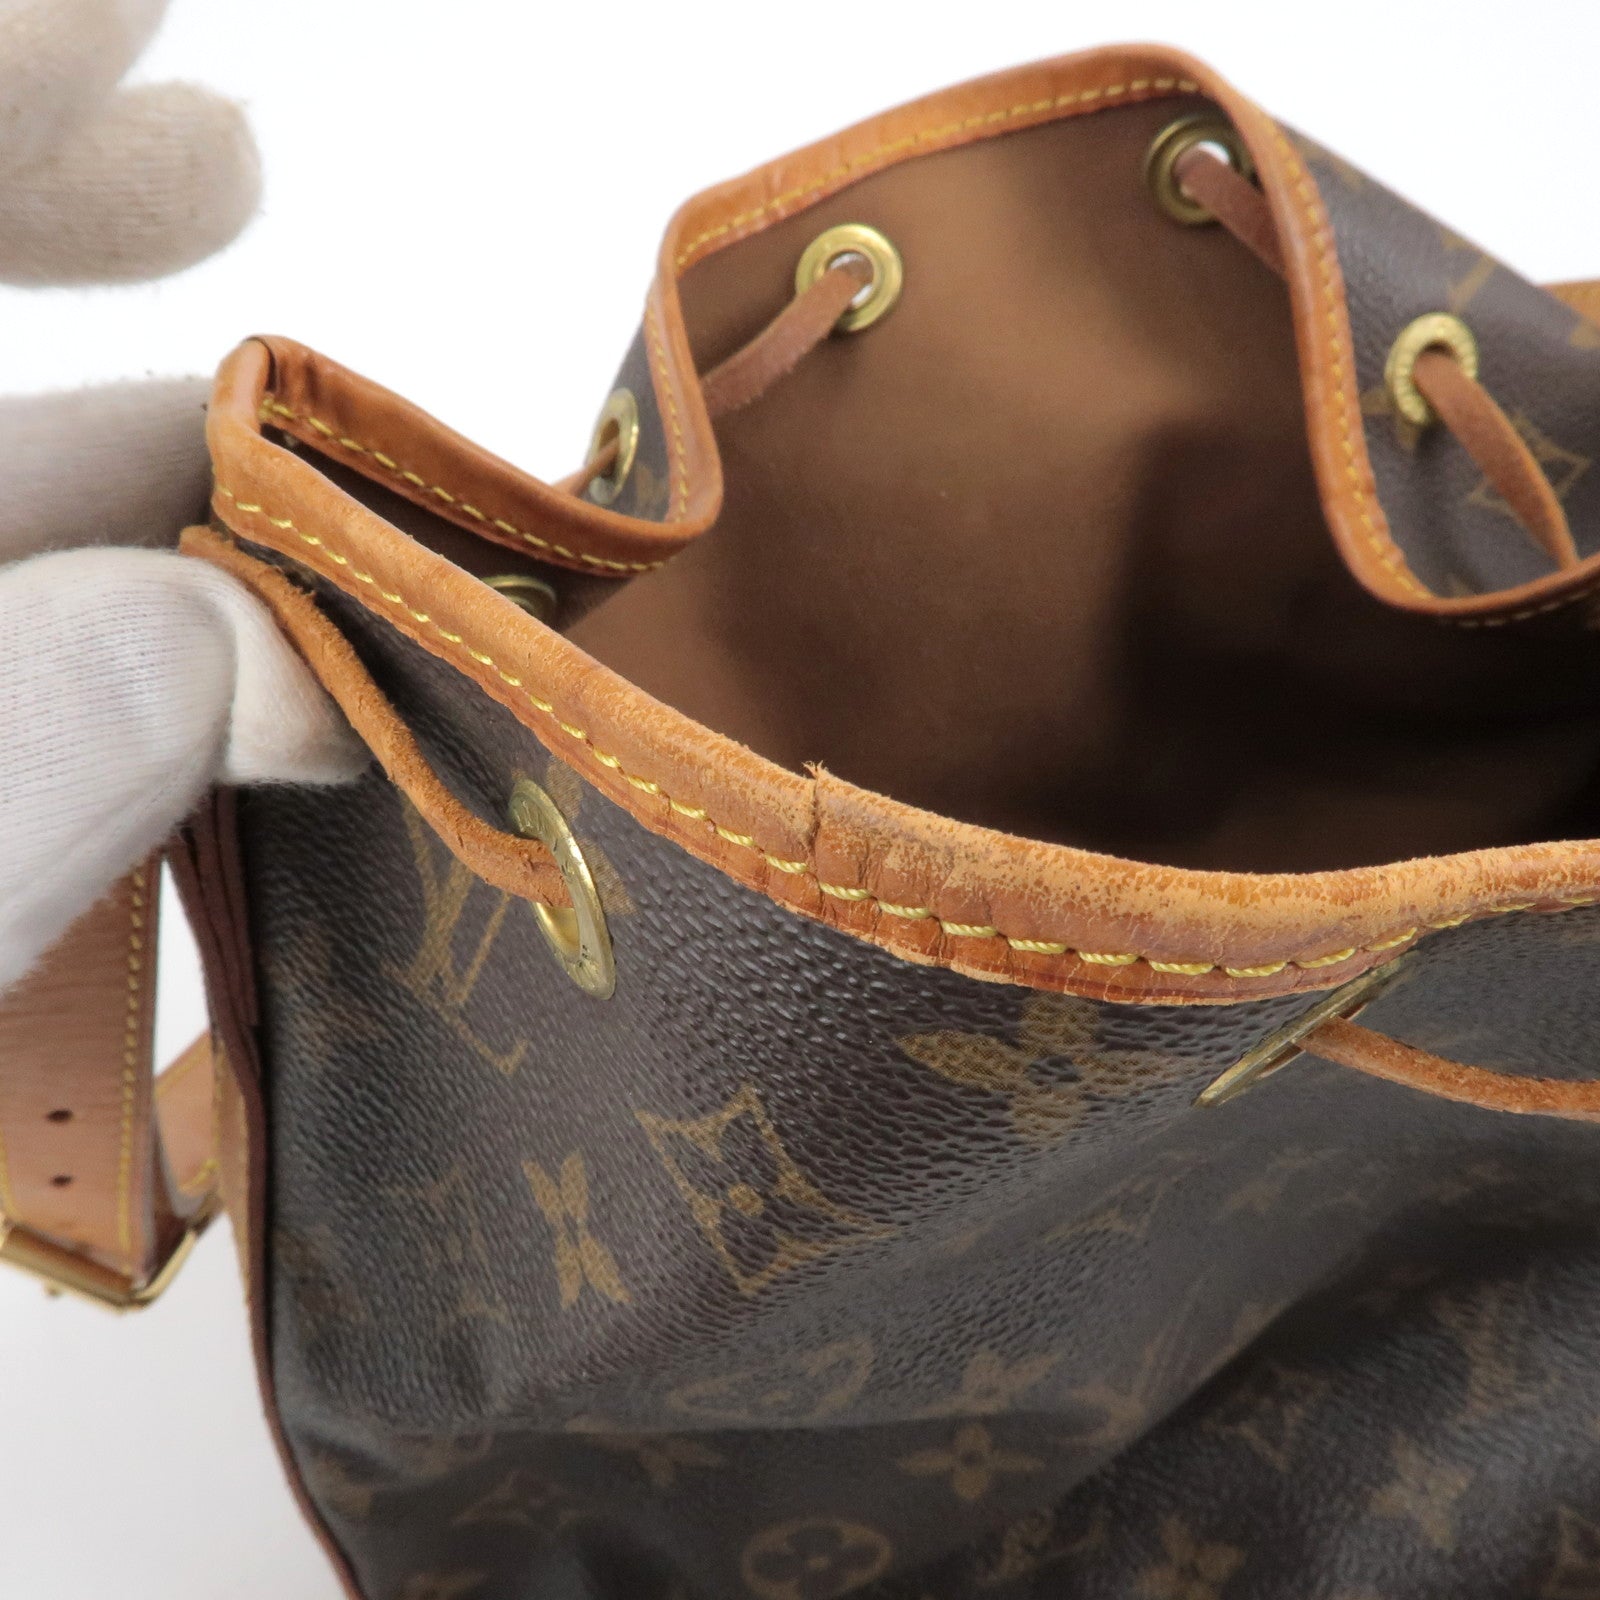 Louis Vuitton's SS19 Keepall: Heres Your Second Chance to Cop